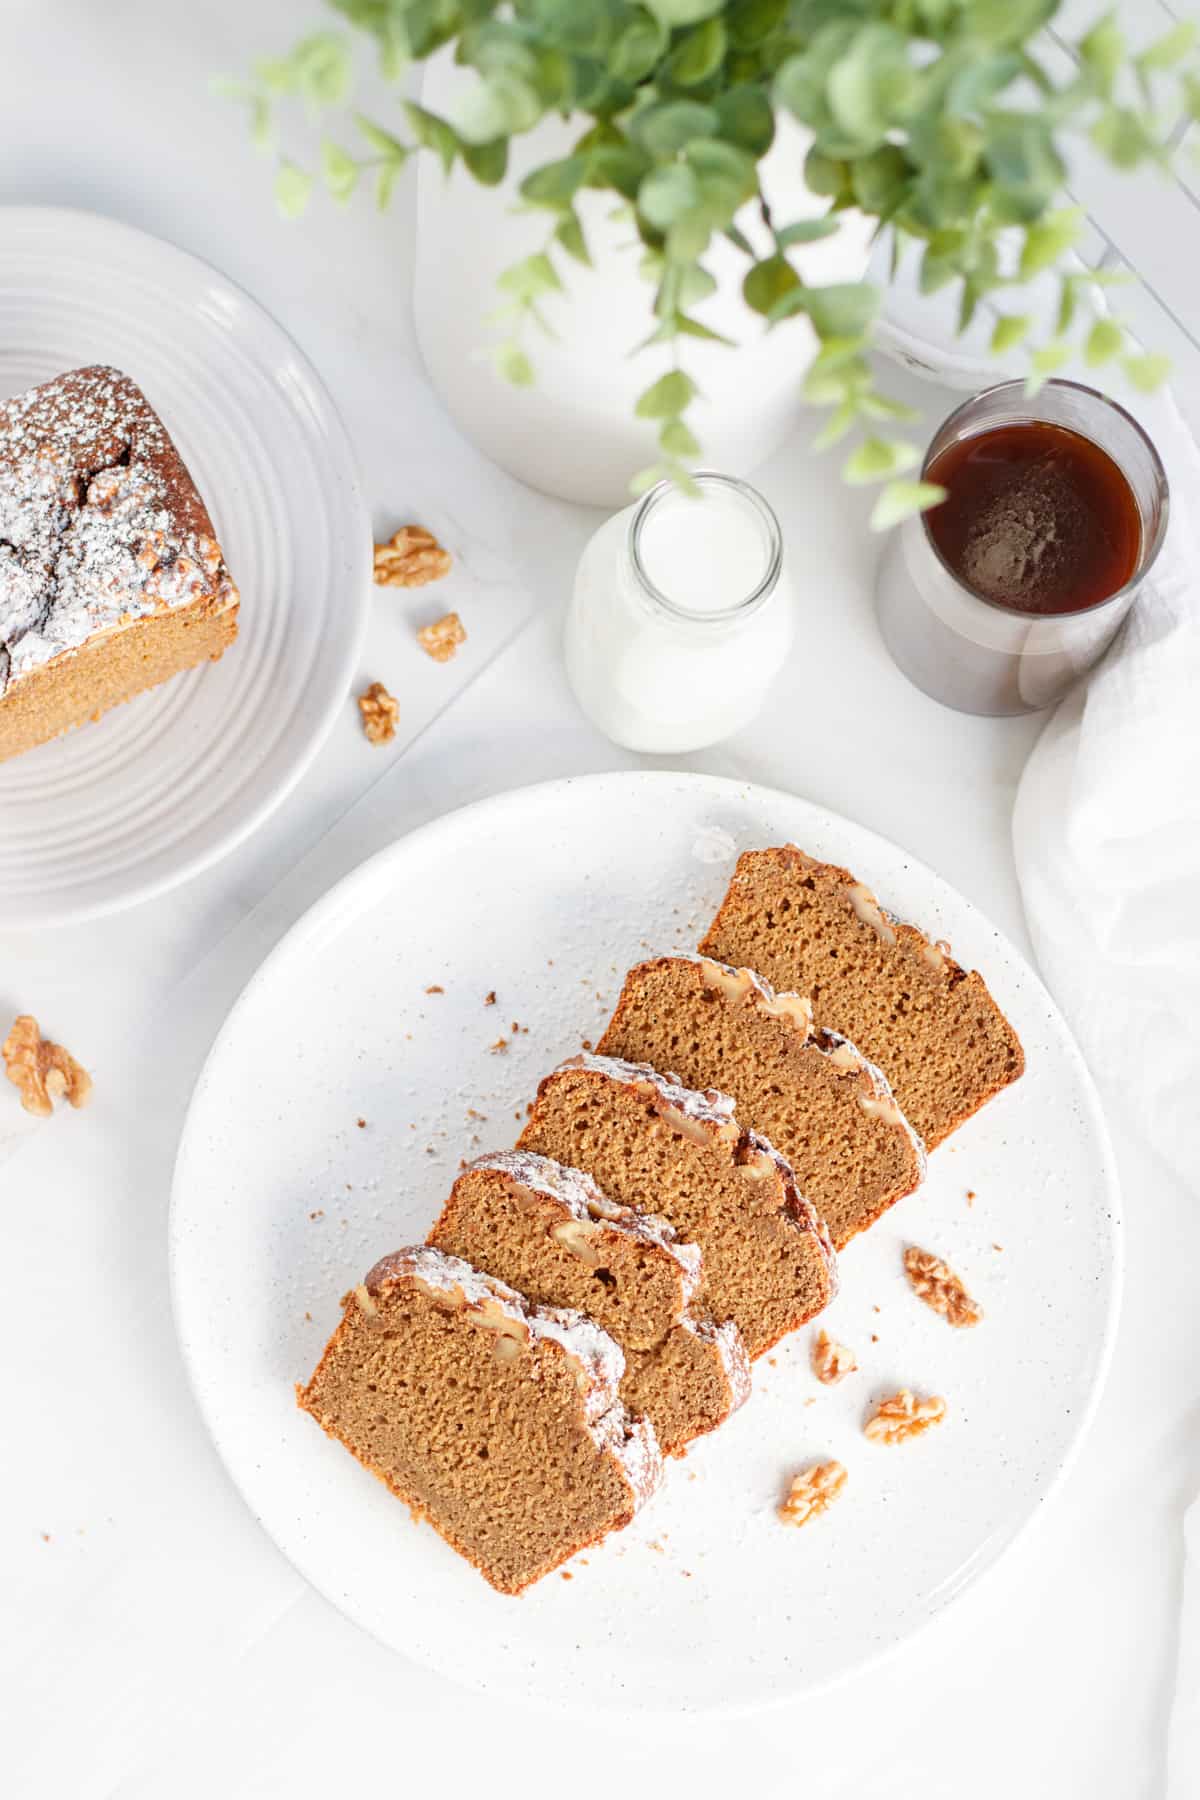 Sliced coffee and walnut loaf on a white plate.